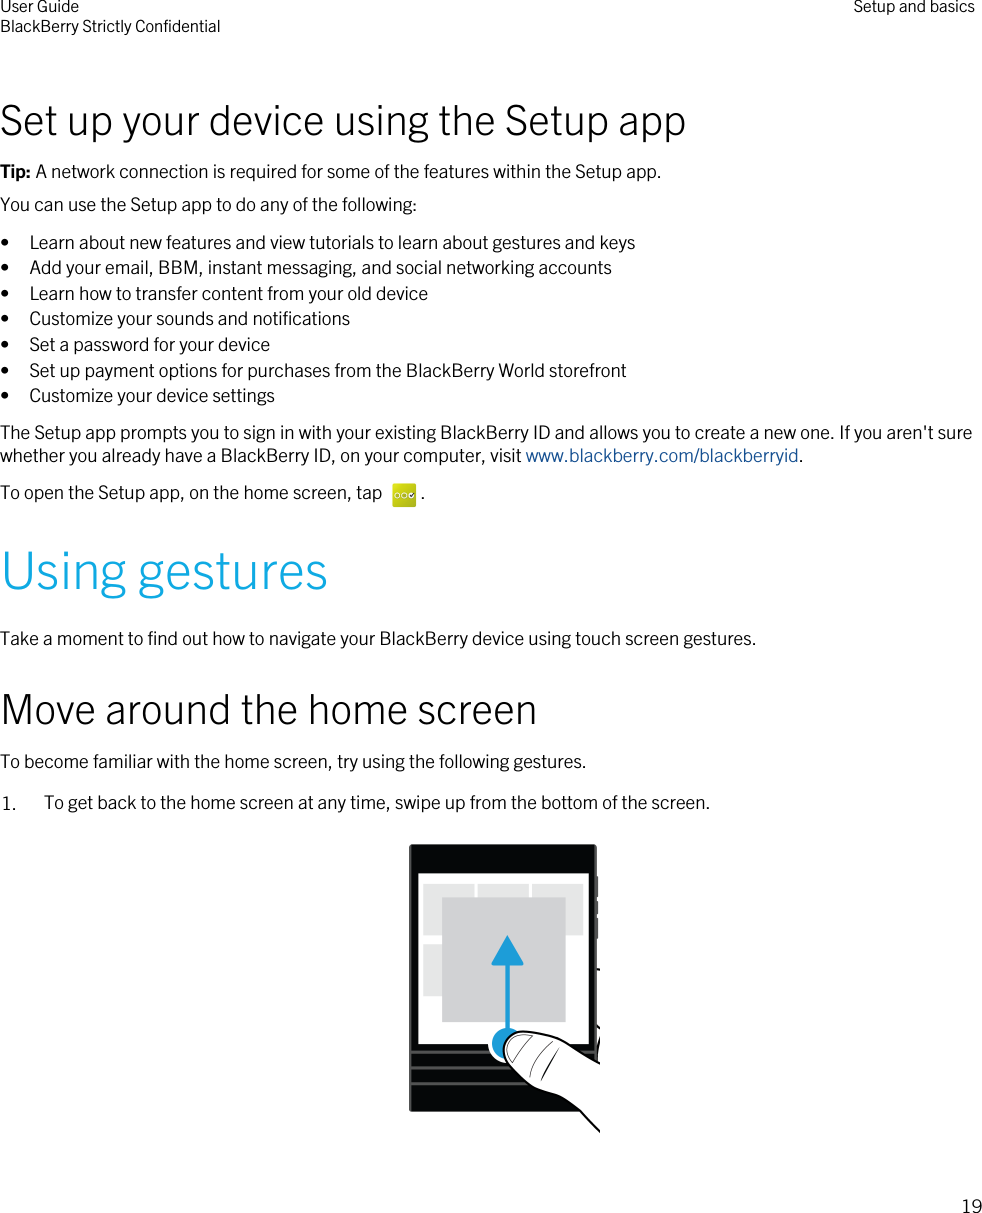 Set up your device using the Setup appTip: A network connection is required for some of the features within the Setup app.You can use the Setup app to do any of the following:• Learn about new features and view tutorials to learn about gestures and keys• Add your email, BBM, instant messaging, and social networking accounts• Learn how to transfer content from your old device• Customize your sounds and notifications• Set a password for your device• Set up payment options for purchases from the BlackBerry World storefront• Customize your device settingsThe Setup app prompts you to sign in with your existing BlackBerry ID and allows you to create a new one. If you aren&apos;t sure whether you already have a BlackBerry ID, on your computer, visit www.blackberry.com/blackberryid.To open the Setup app, on the home screen, tap  .Using gesturesTake a moment to find out how to navigate your BlackBerry device using touch screen gestures.Move around the home screenTo become familiar with the home screen, try using the following gestures.1. To get back to the home screen at any time, swipe up from the bottom of the screen.  User GuideBlackBerry Strictly Confidential Setup and basics19